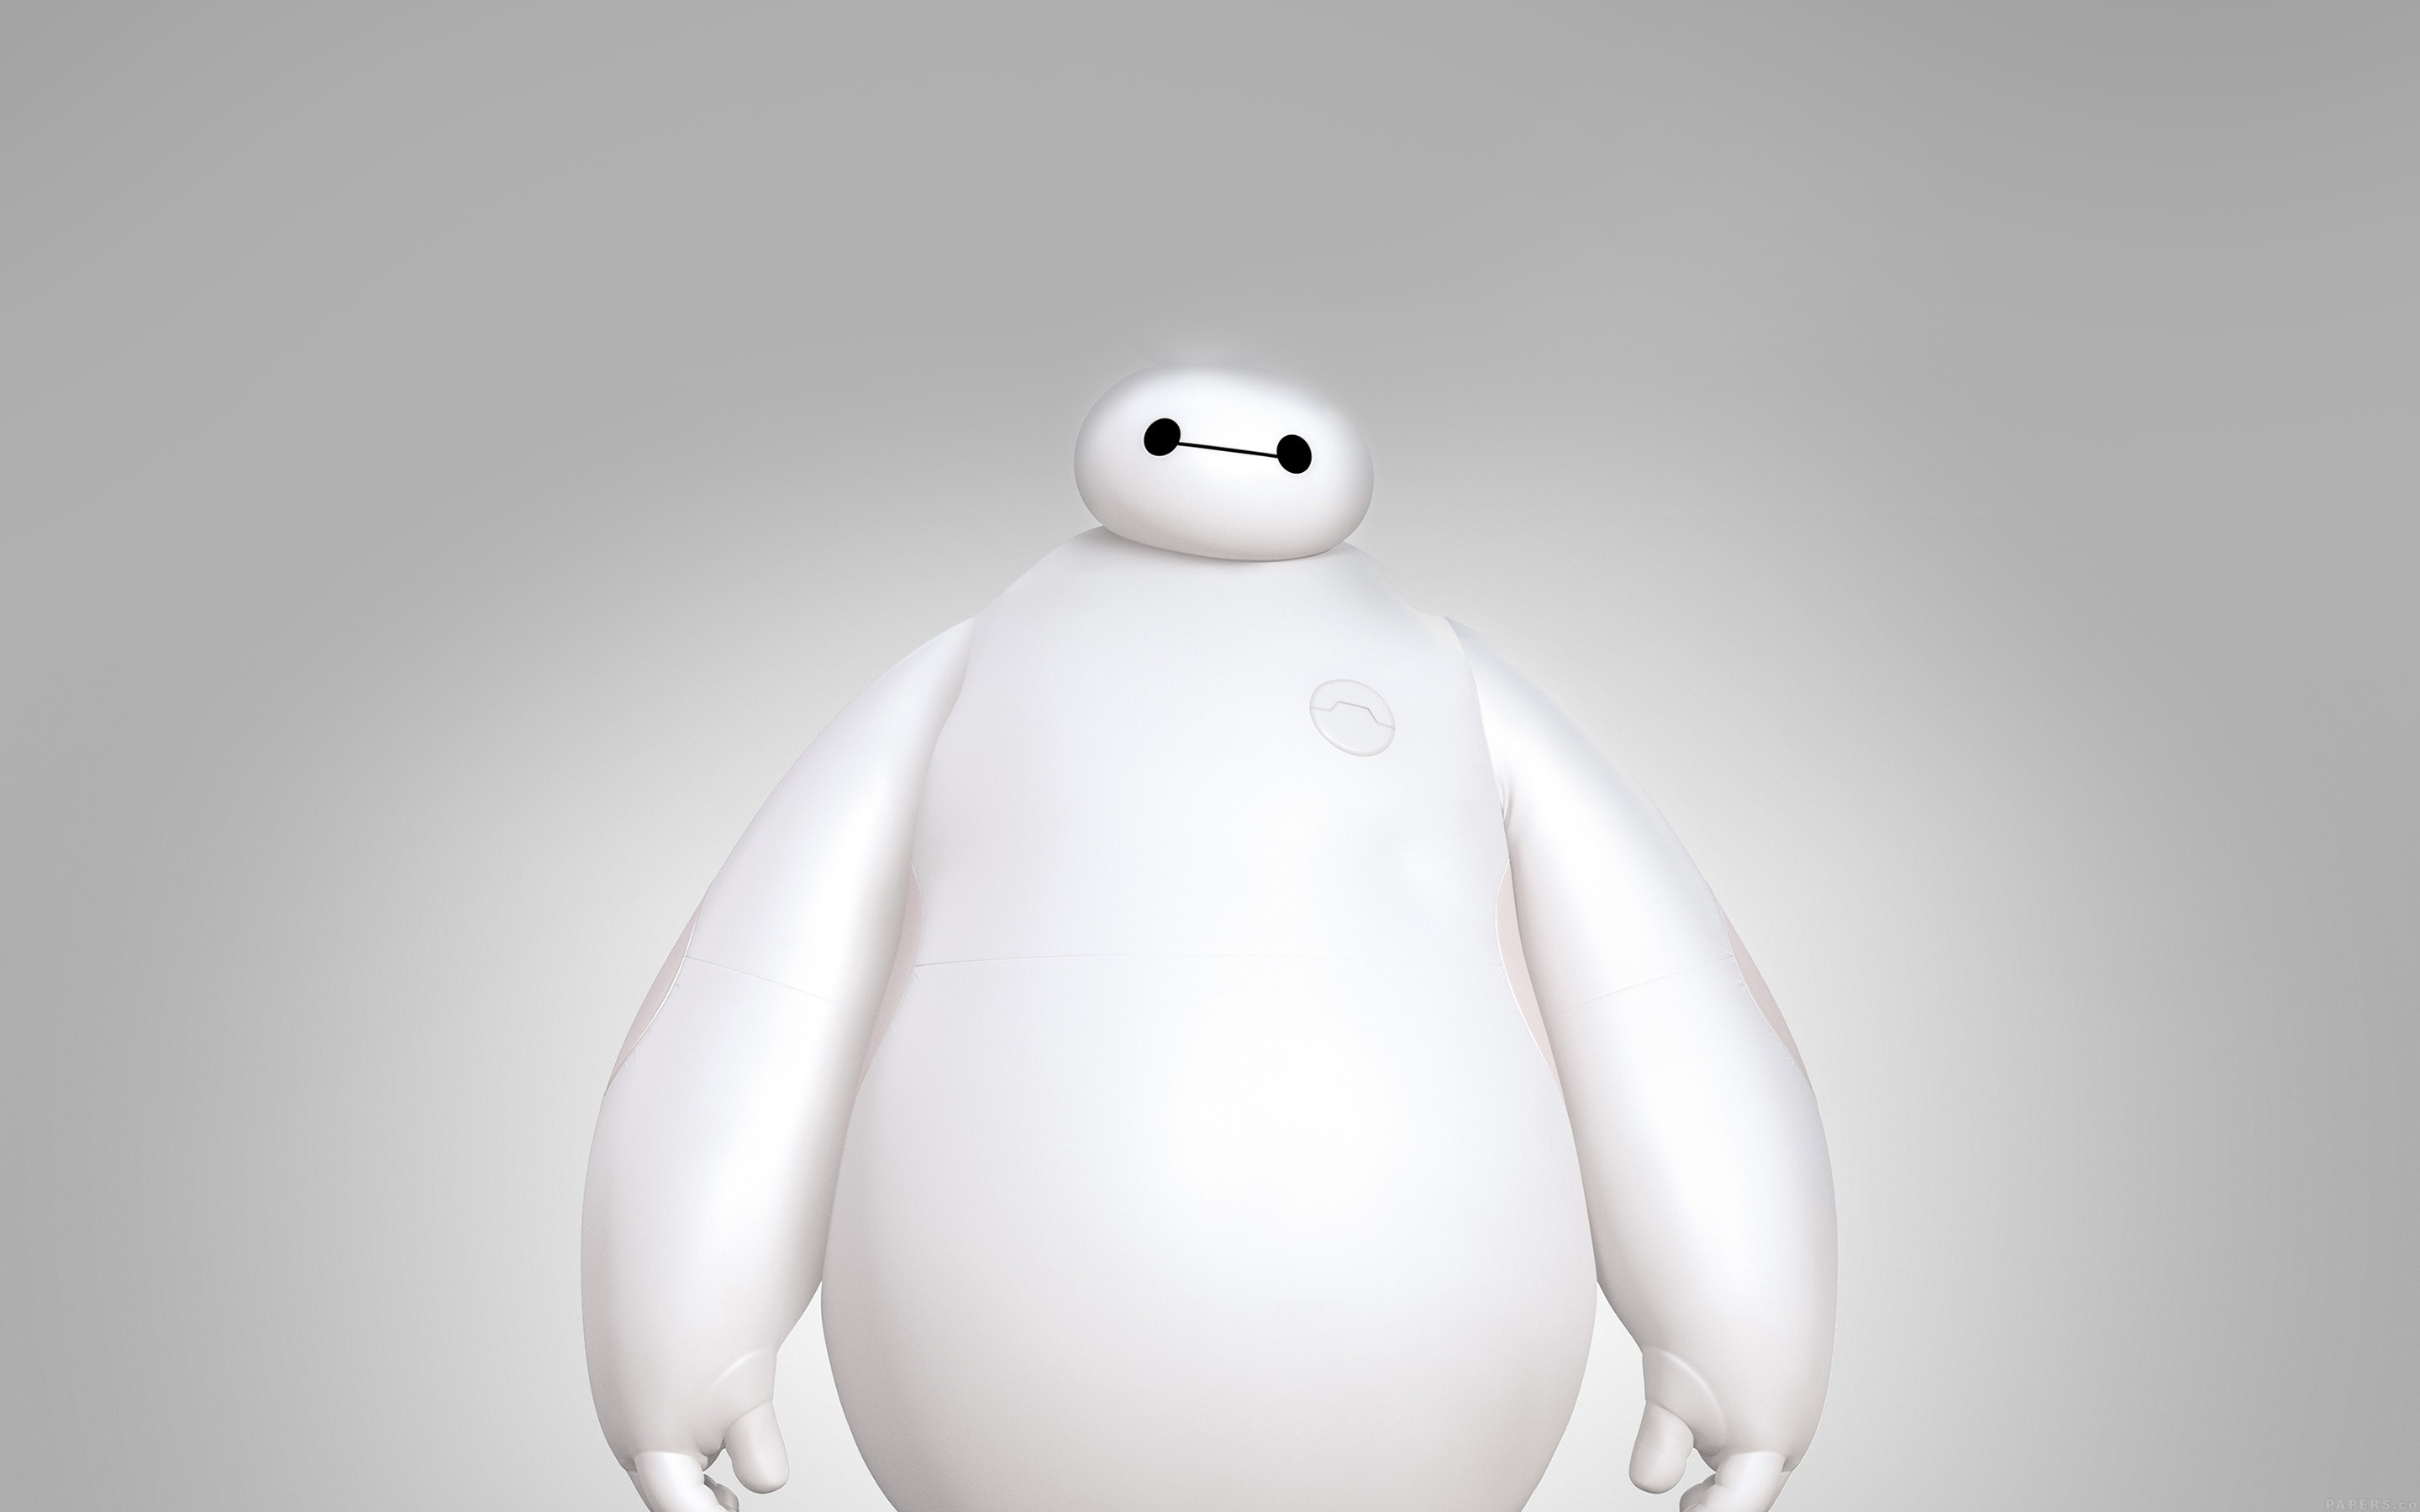 General 2880x1800 white white background movies Big Hero 6 animated movies simple background